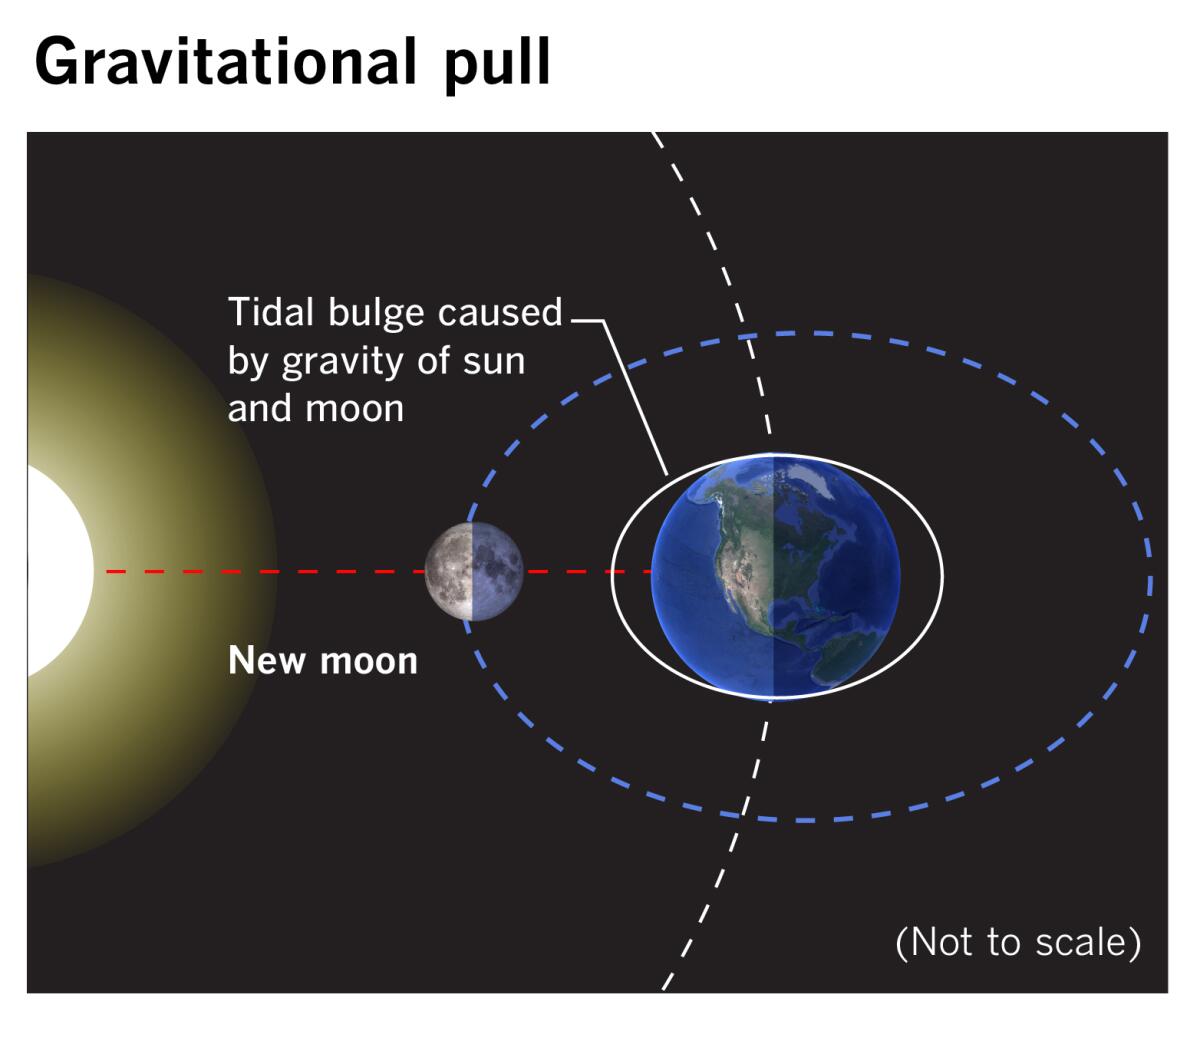 Diagram showing the combined gravitational pull of the Sun and the new Moon, causing the tides to rise.